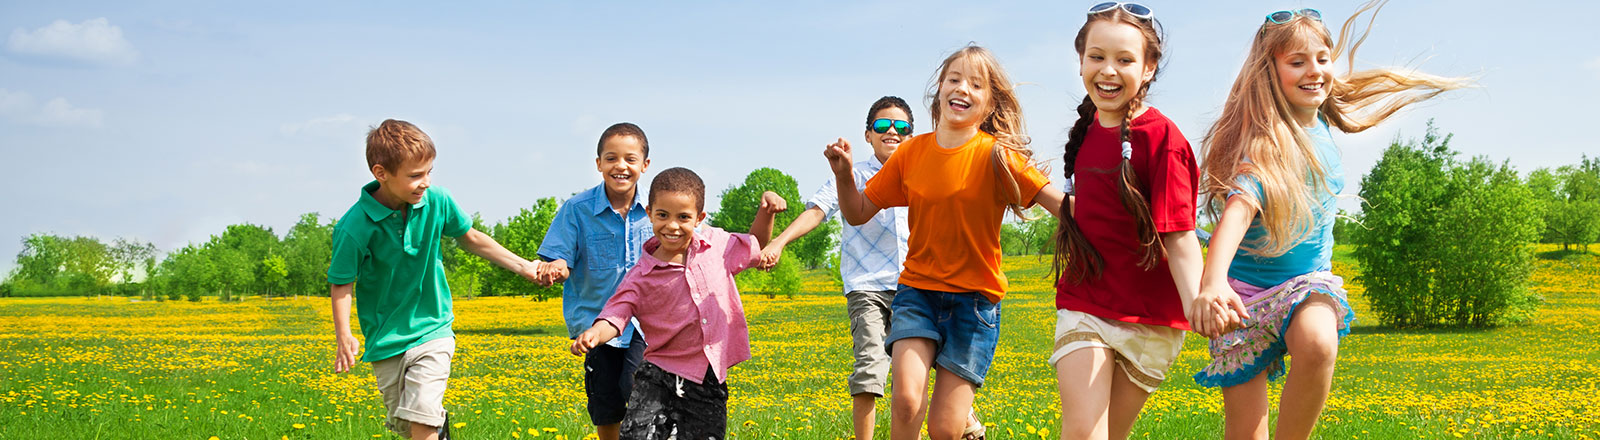 Group of kids running through a field on a sunny day